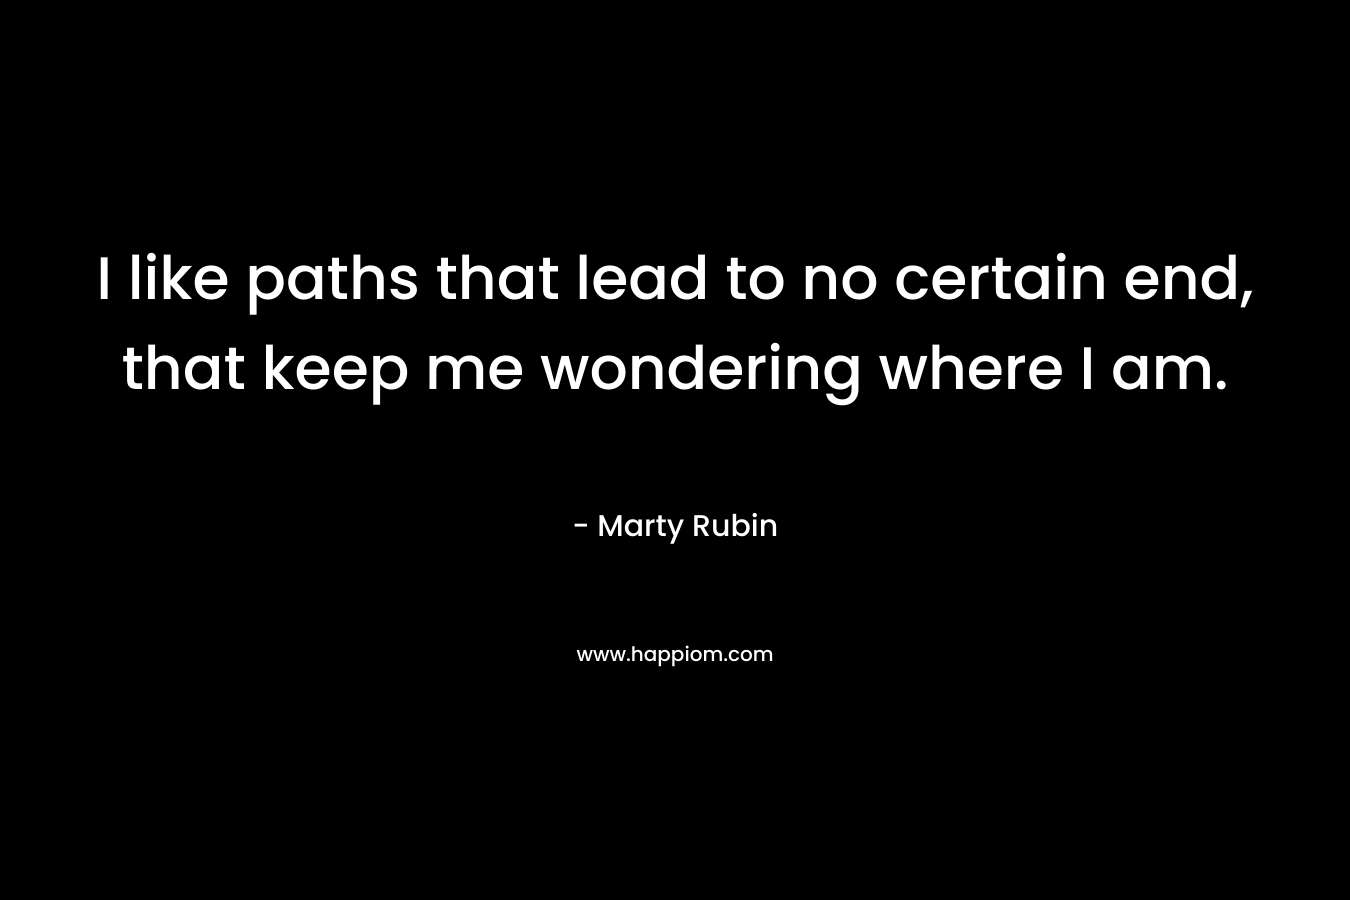 I like paths that lead to no certain end, that keep me wondering where I am. – Marty Rubin